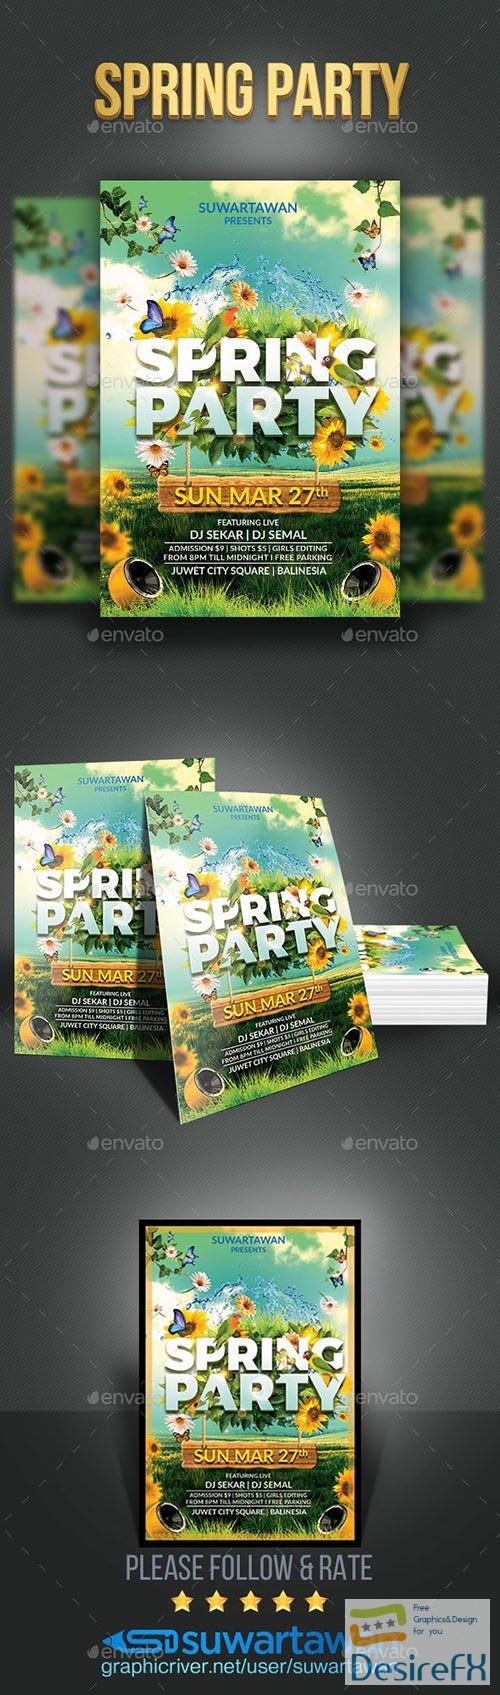 Spring Party | Clubs & Parties 21460839